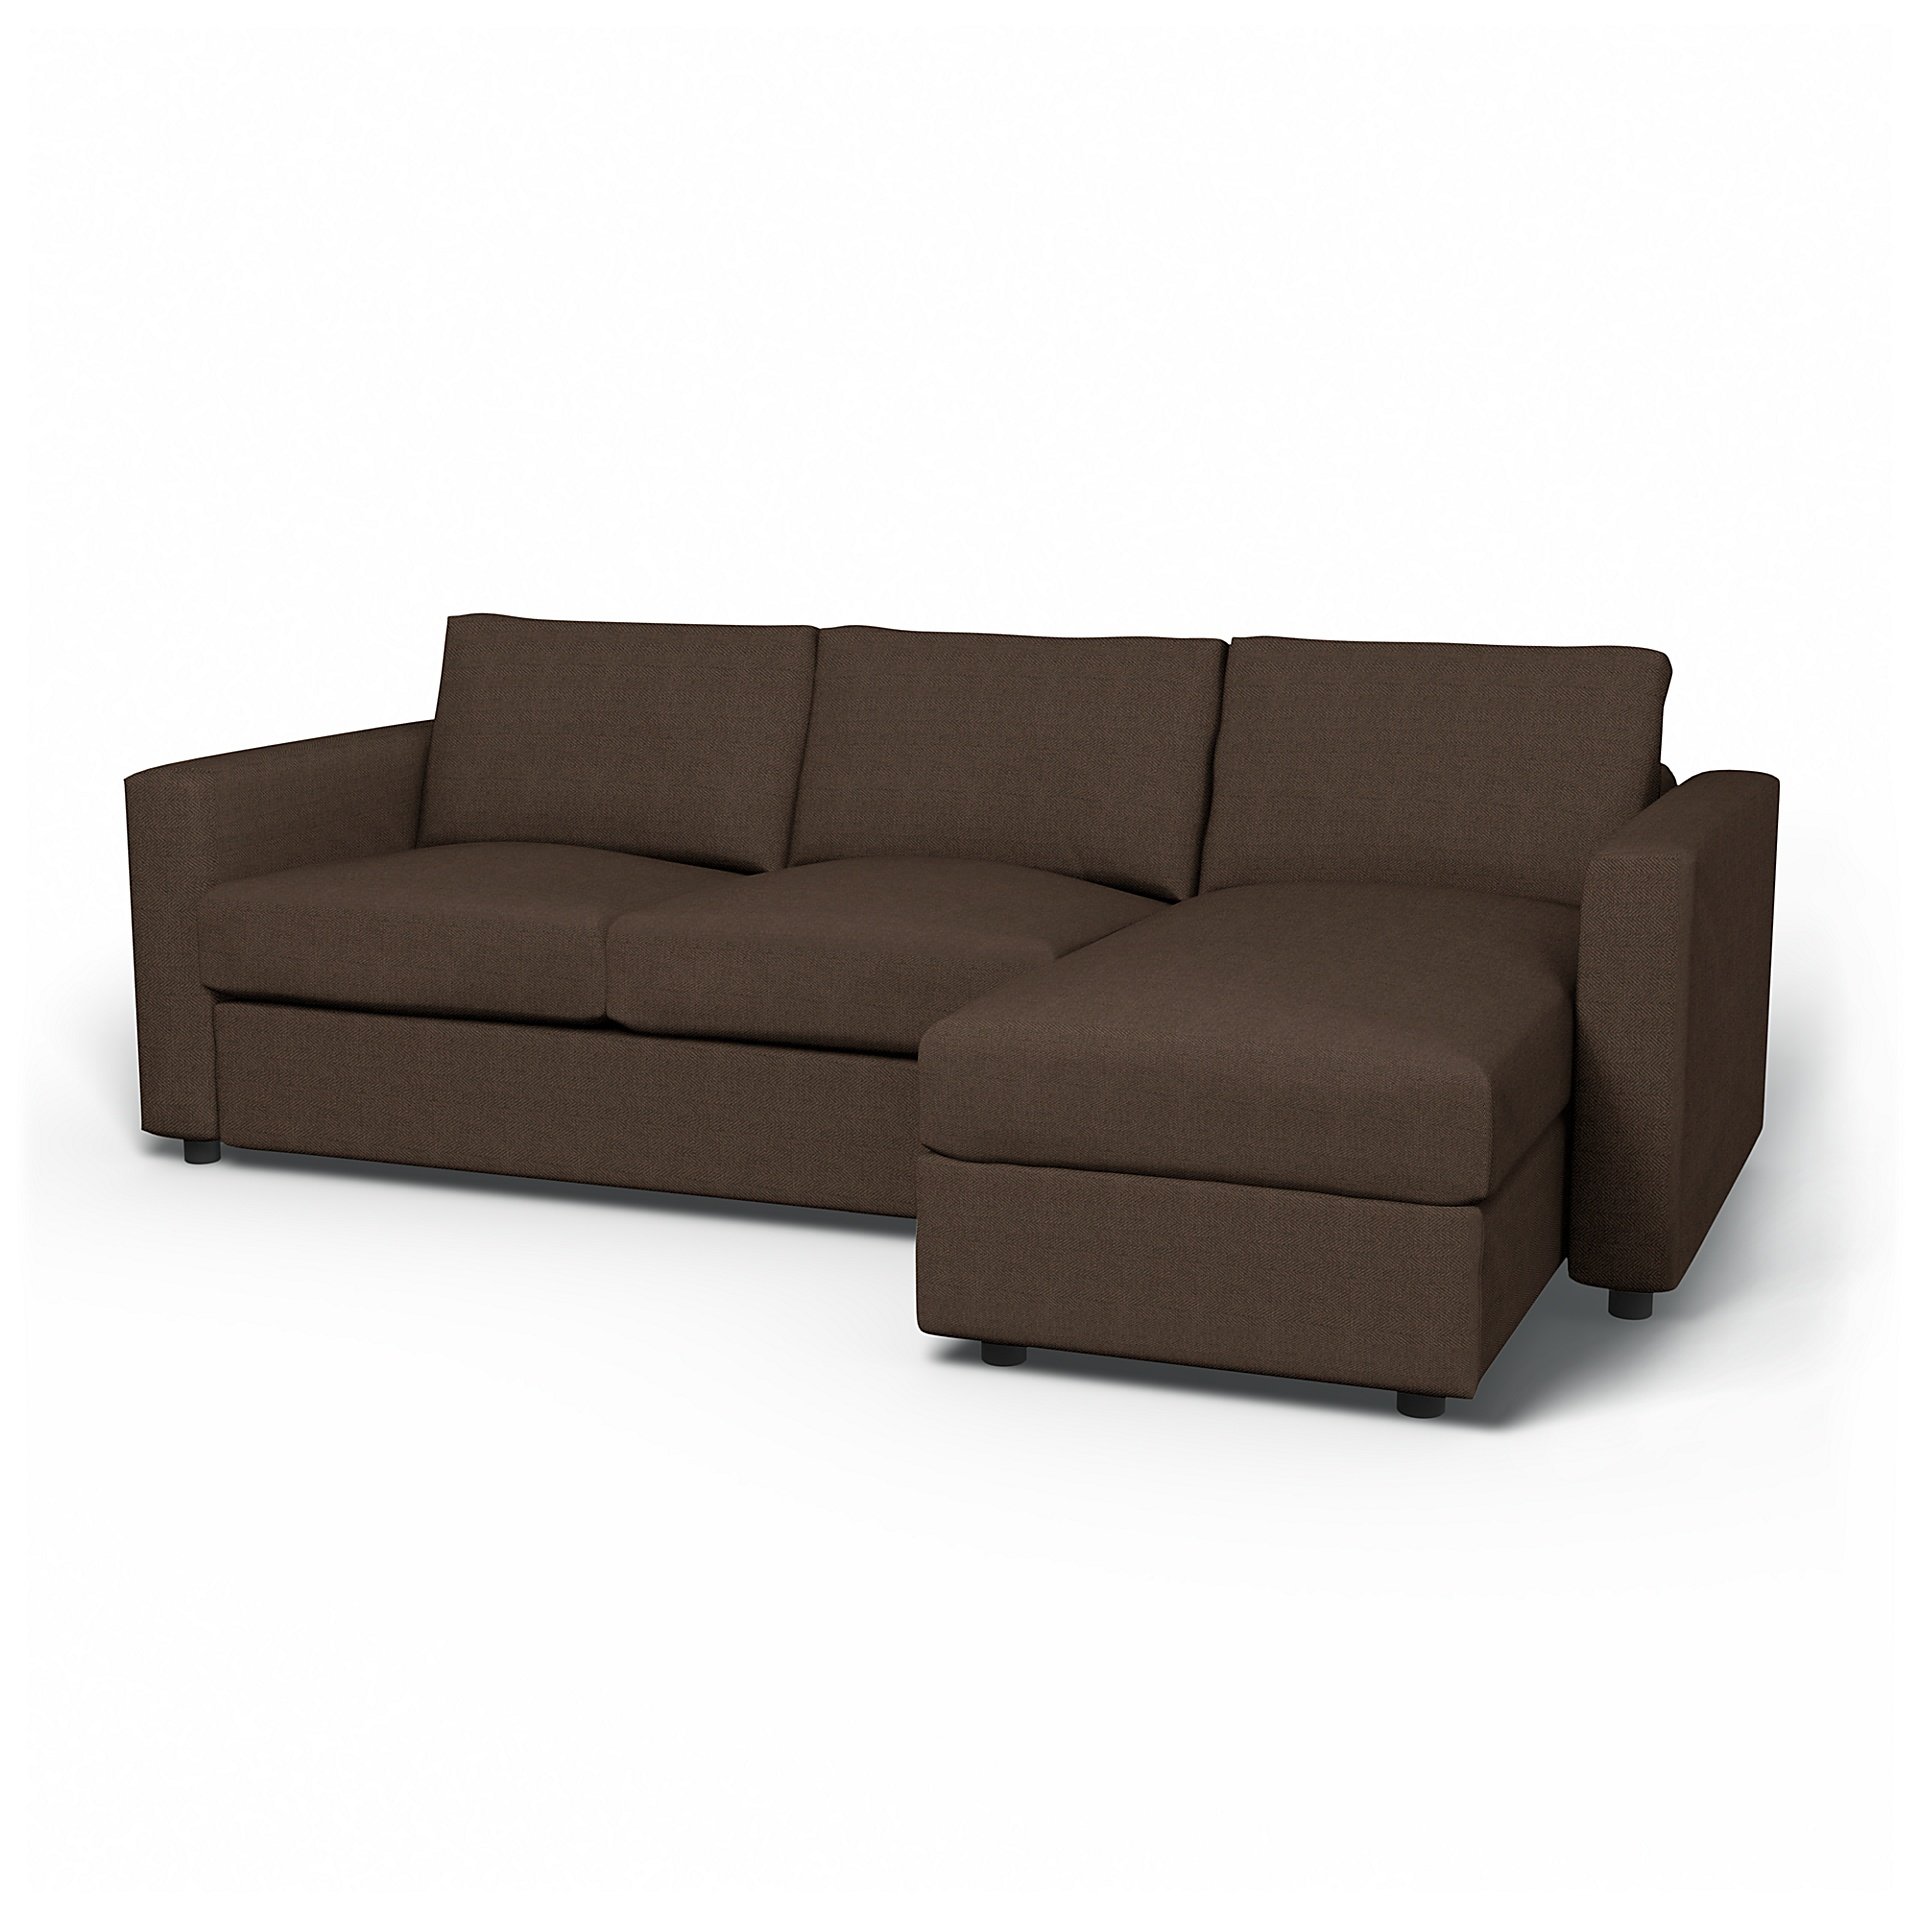 IKEA - Vimle 2 Seater Sofa with Chaise Cover, Chocolate, Boucle & Texture - Bemz